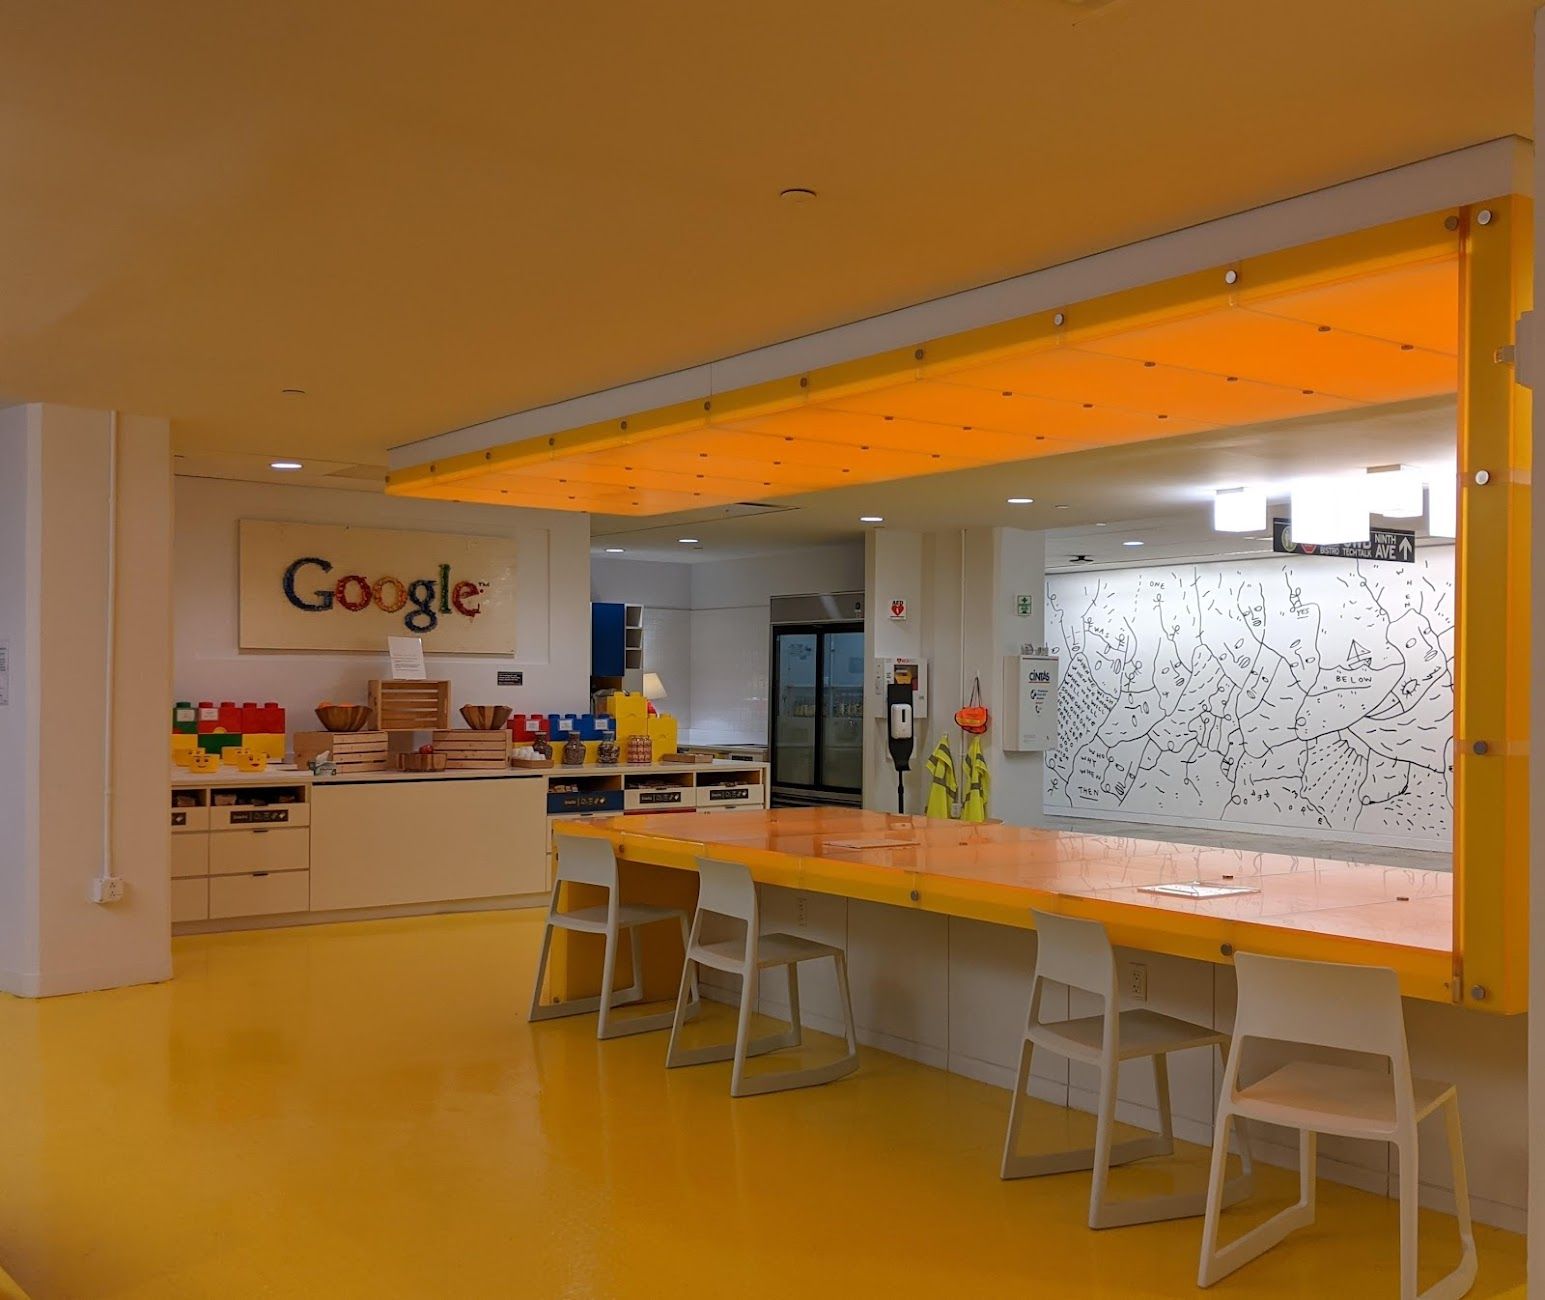 "Returning to Office" at Google NYC